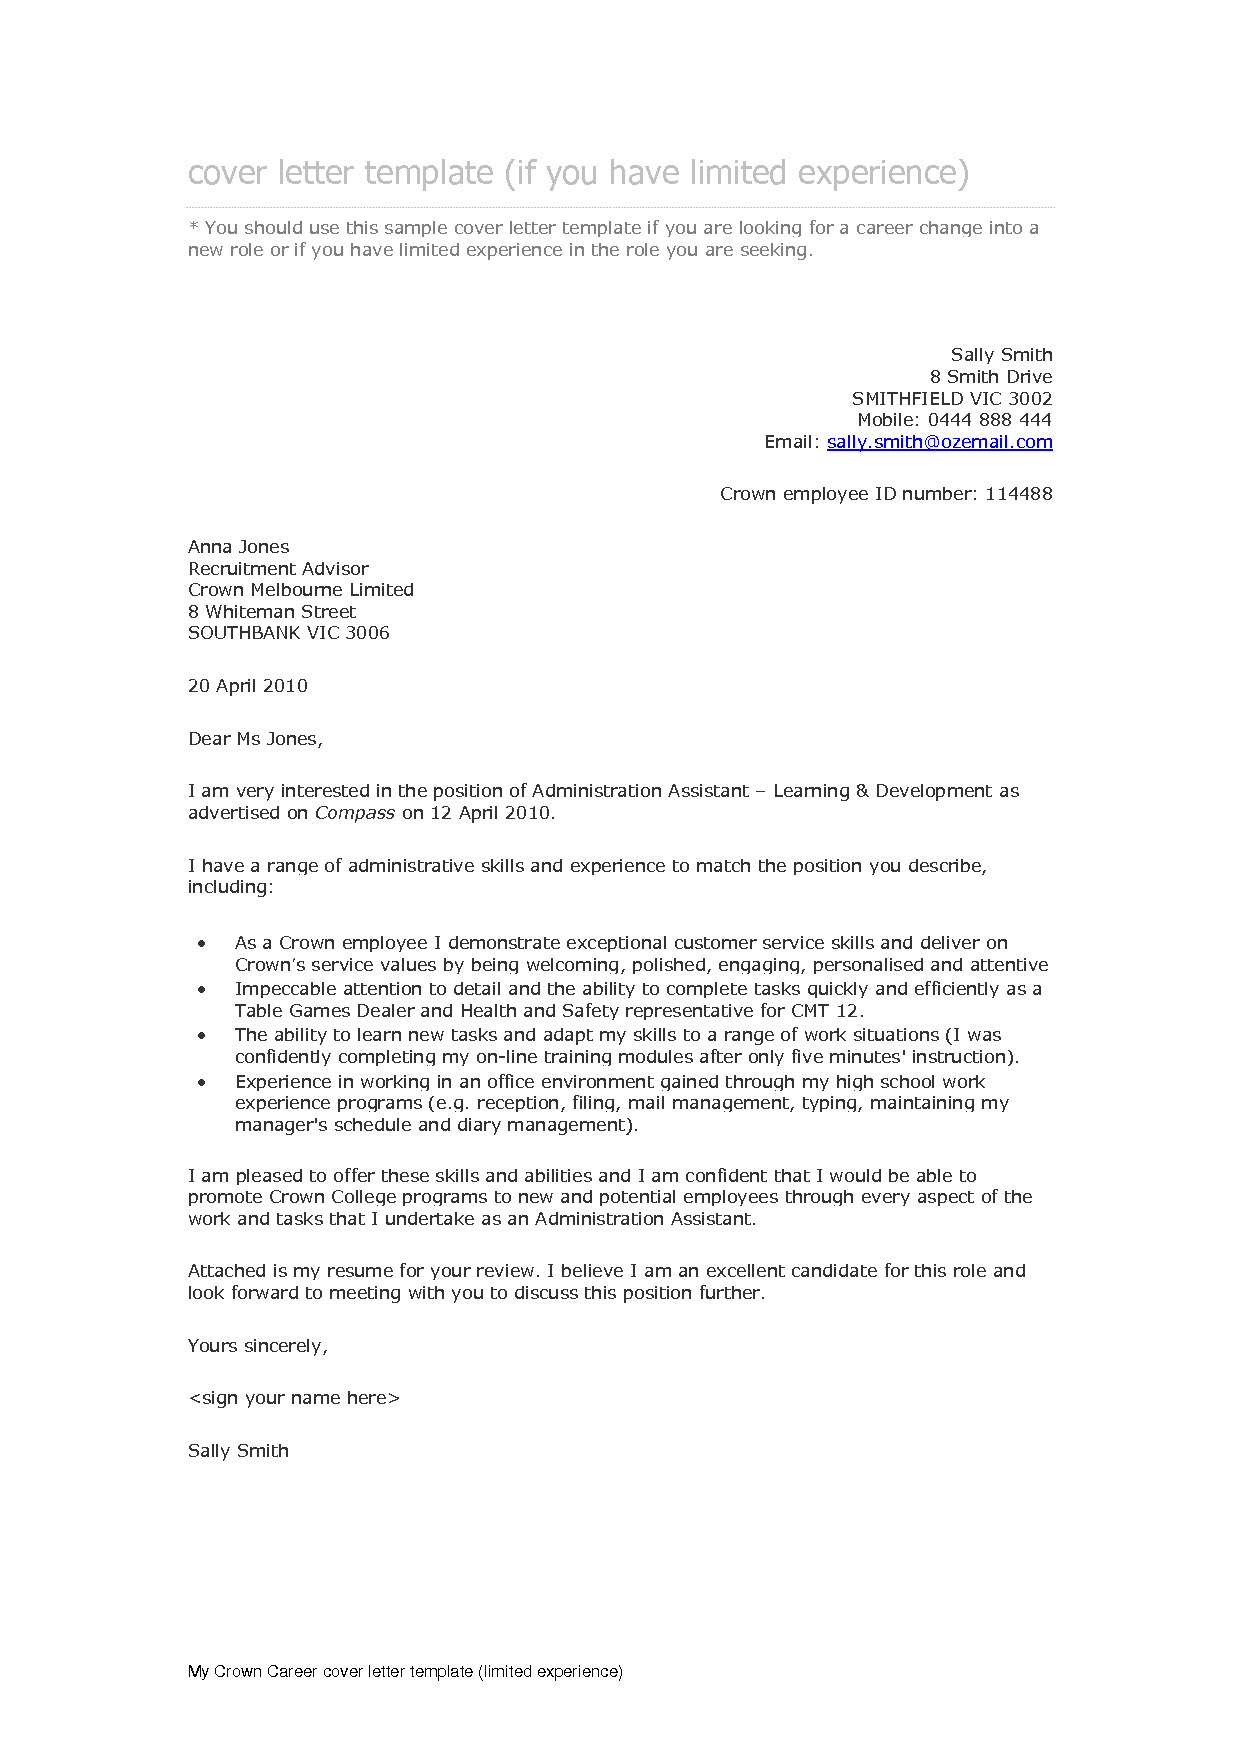 Example Of Cover Letter For Work Placement Mediafoxstudio.com